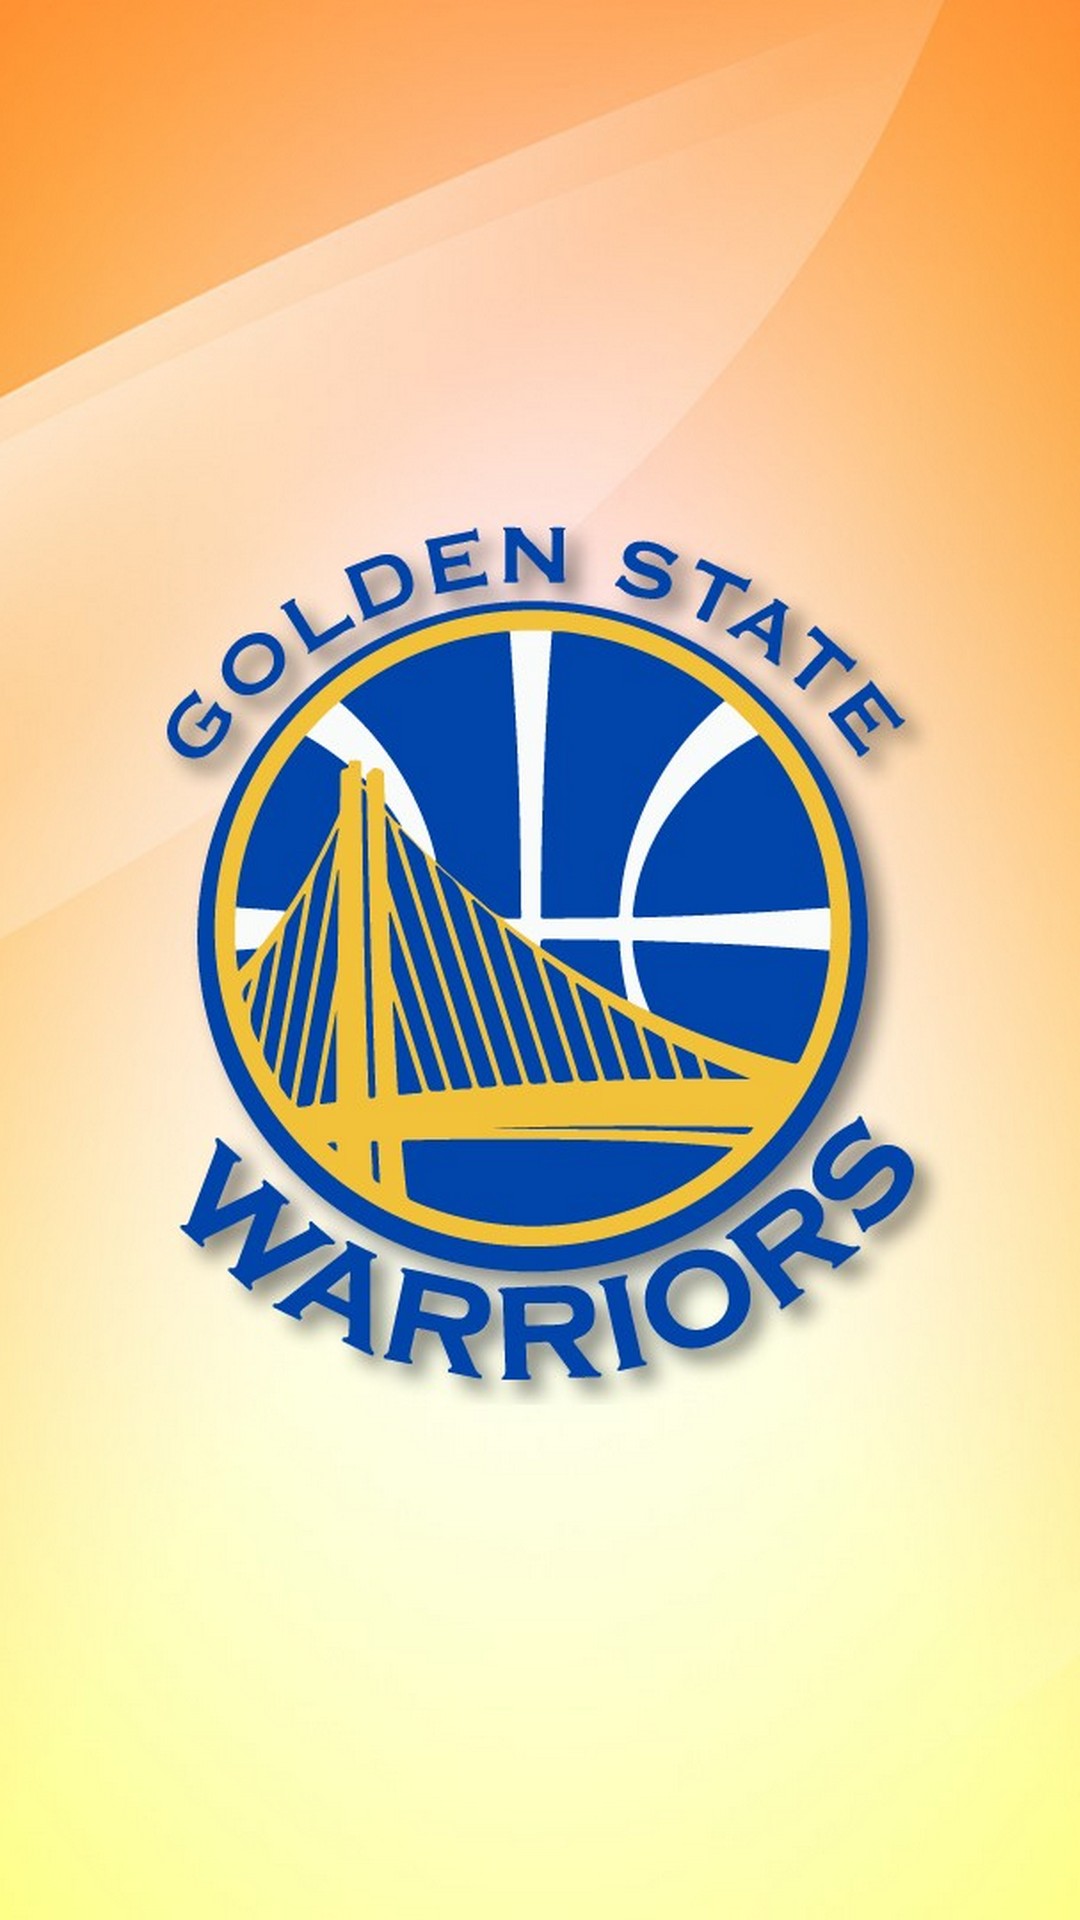 Golden State Warriors iPhone 7 Wallpaper with image resolution 1080x1920 pixel. You can use this wallpaper as background for your desktop Computer Screensavers, Android or iPhone smartphones